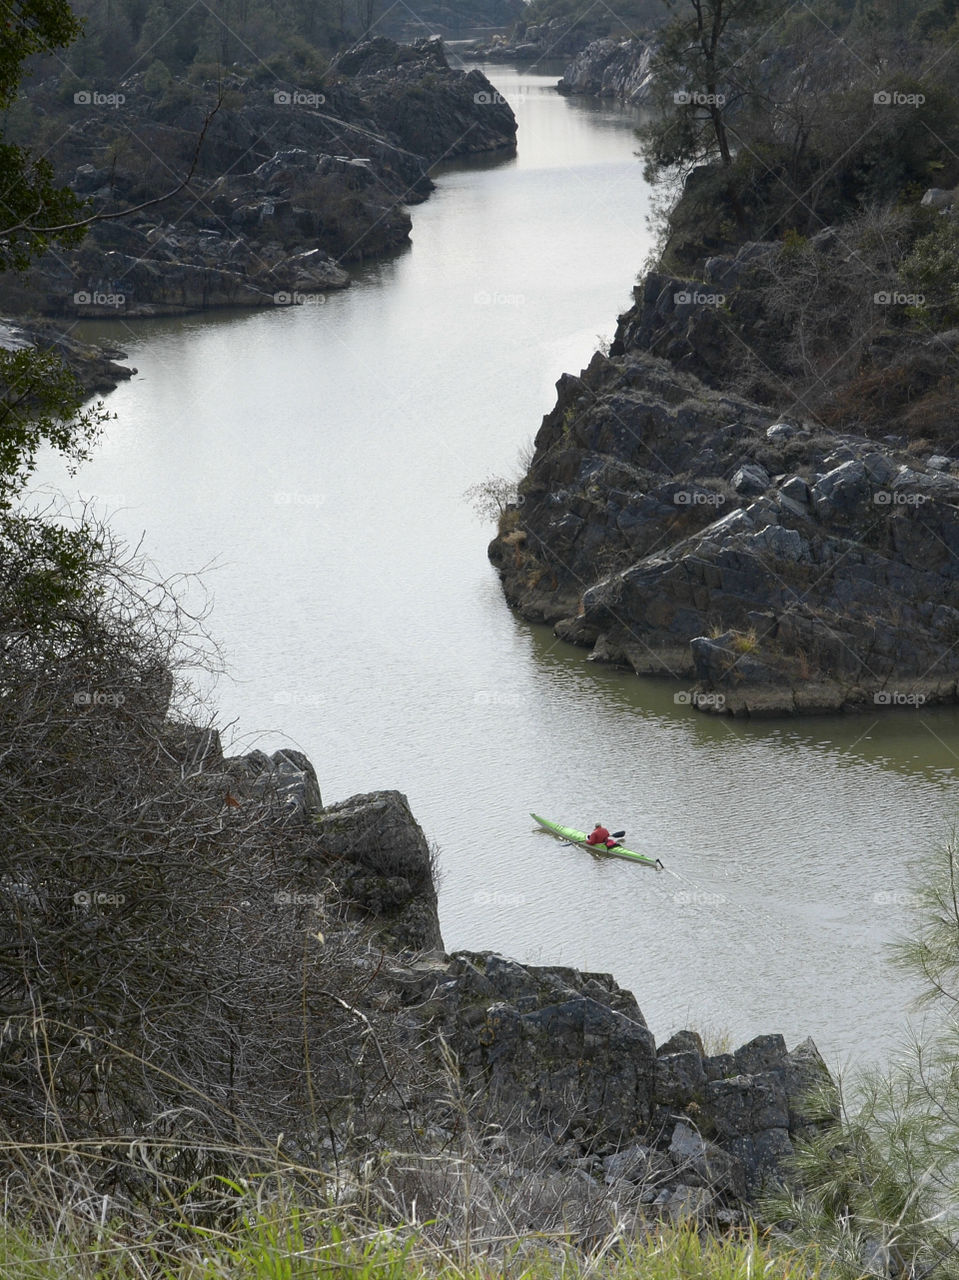 A person kayaking on river